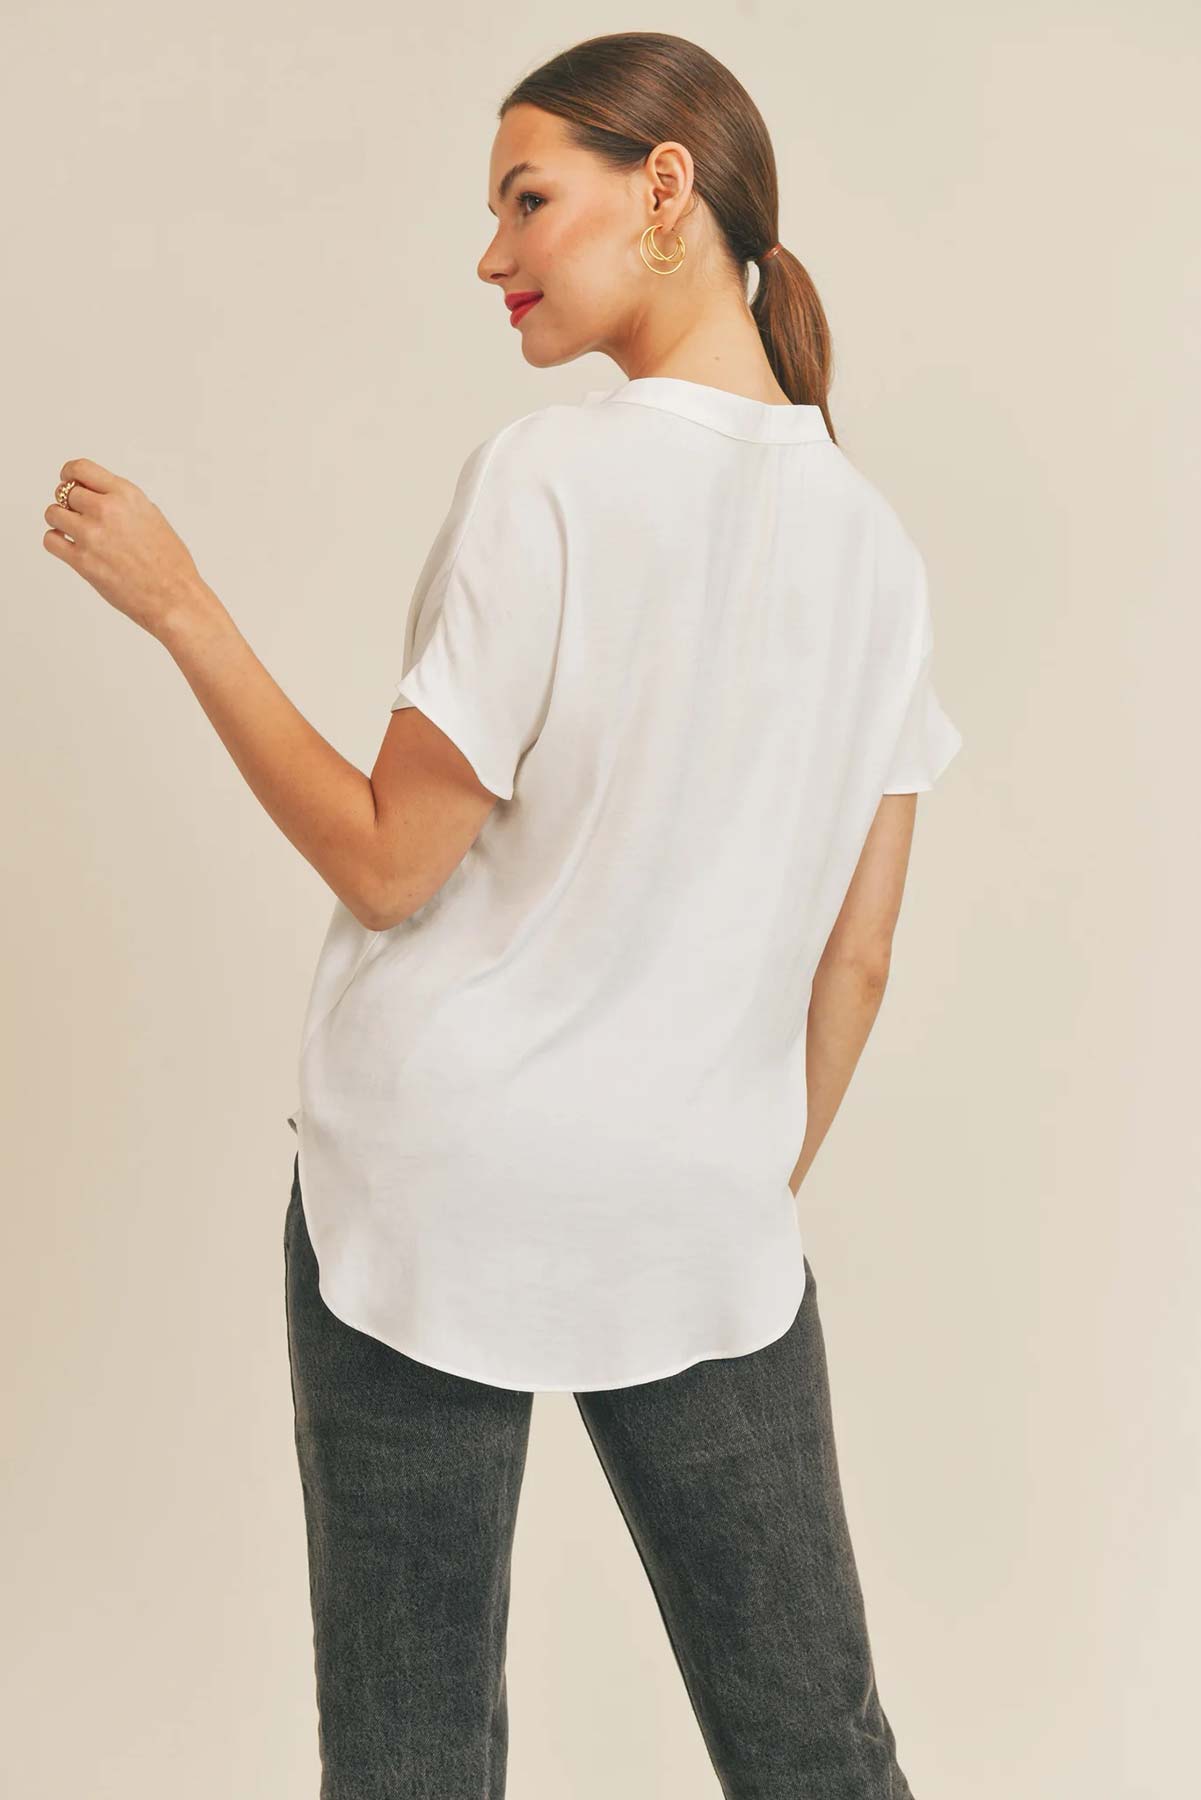 Reset by Jane - Esme Top - White - Back